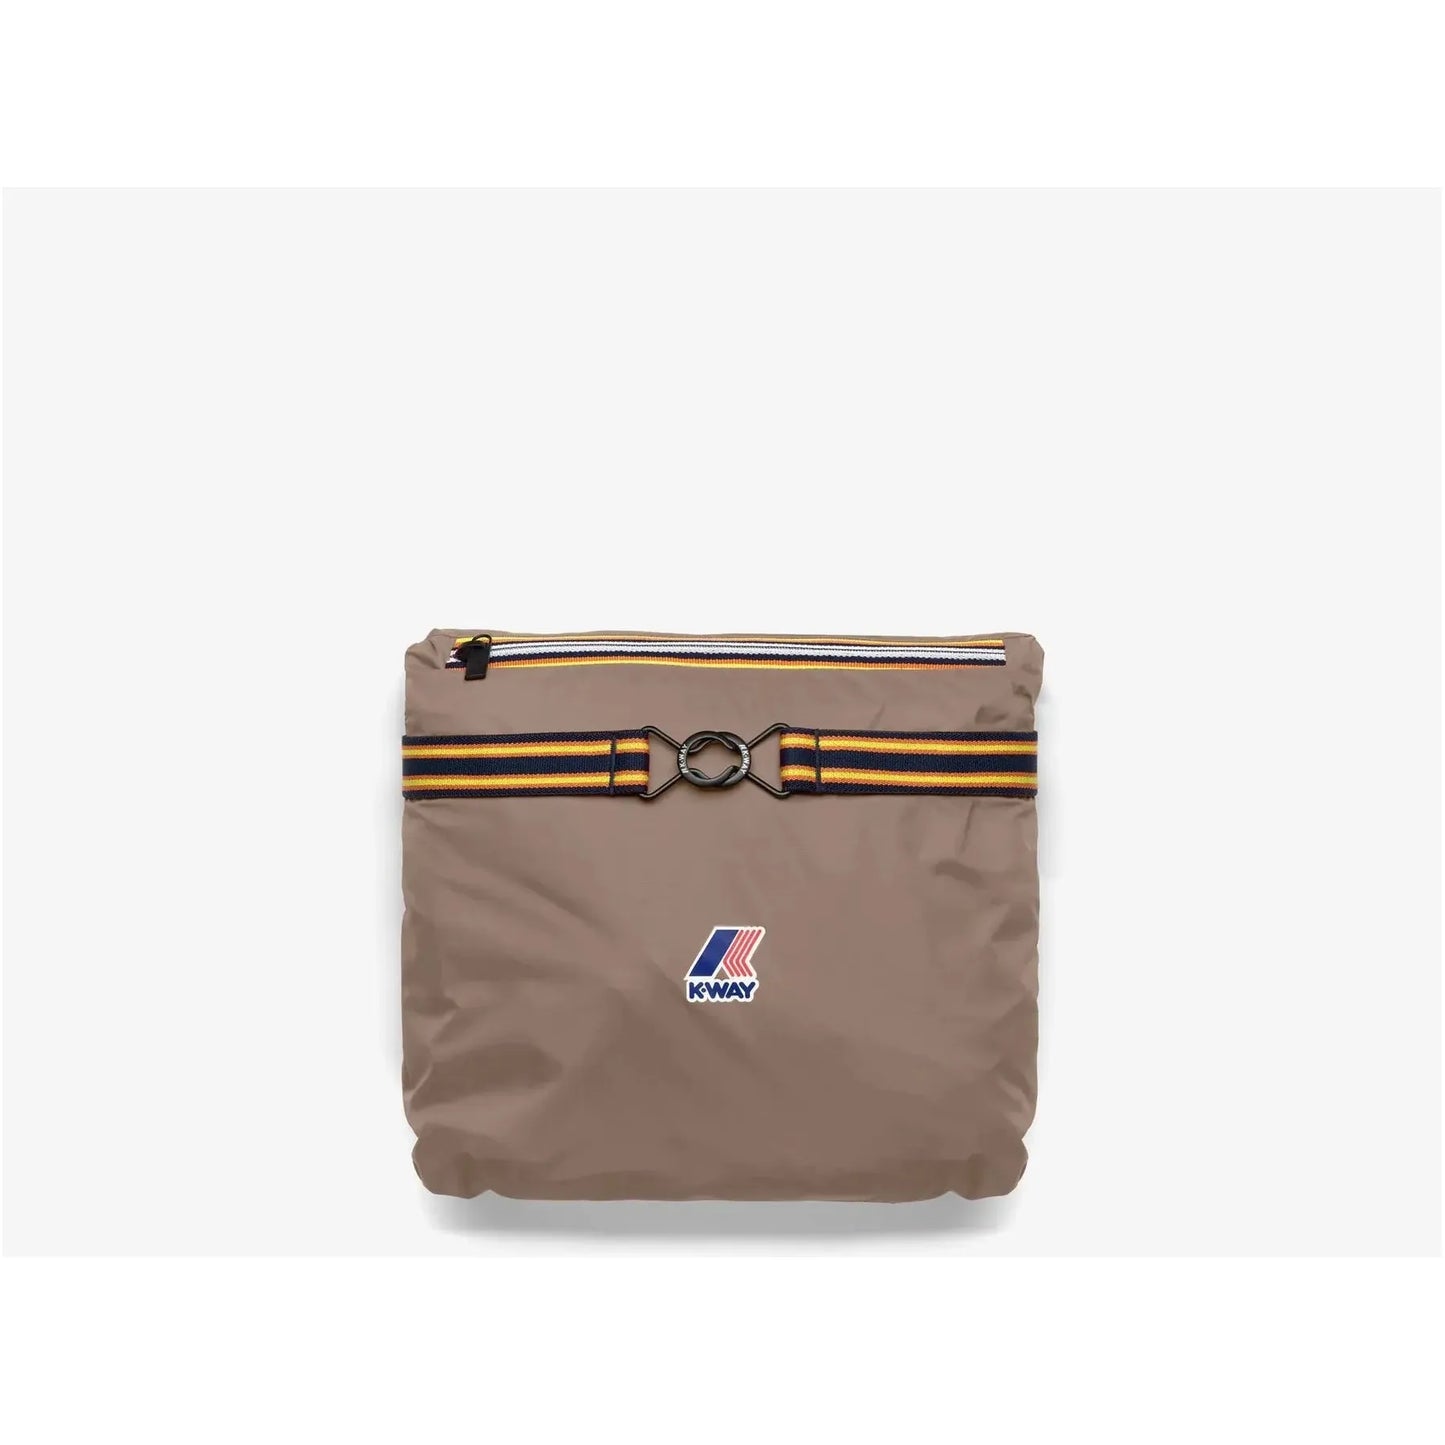 A Le Vrai 3.0 Rennes brown waterproof crossbody bag with a blue and yellow stripe, featuring a circular metal buckle and a logo on the bottom right.